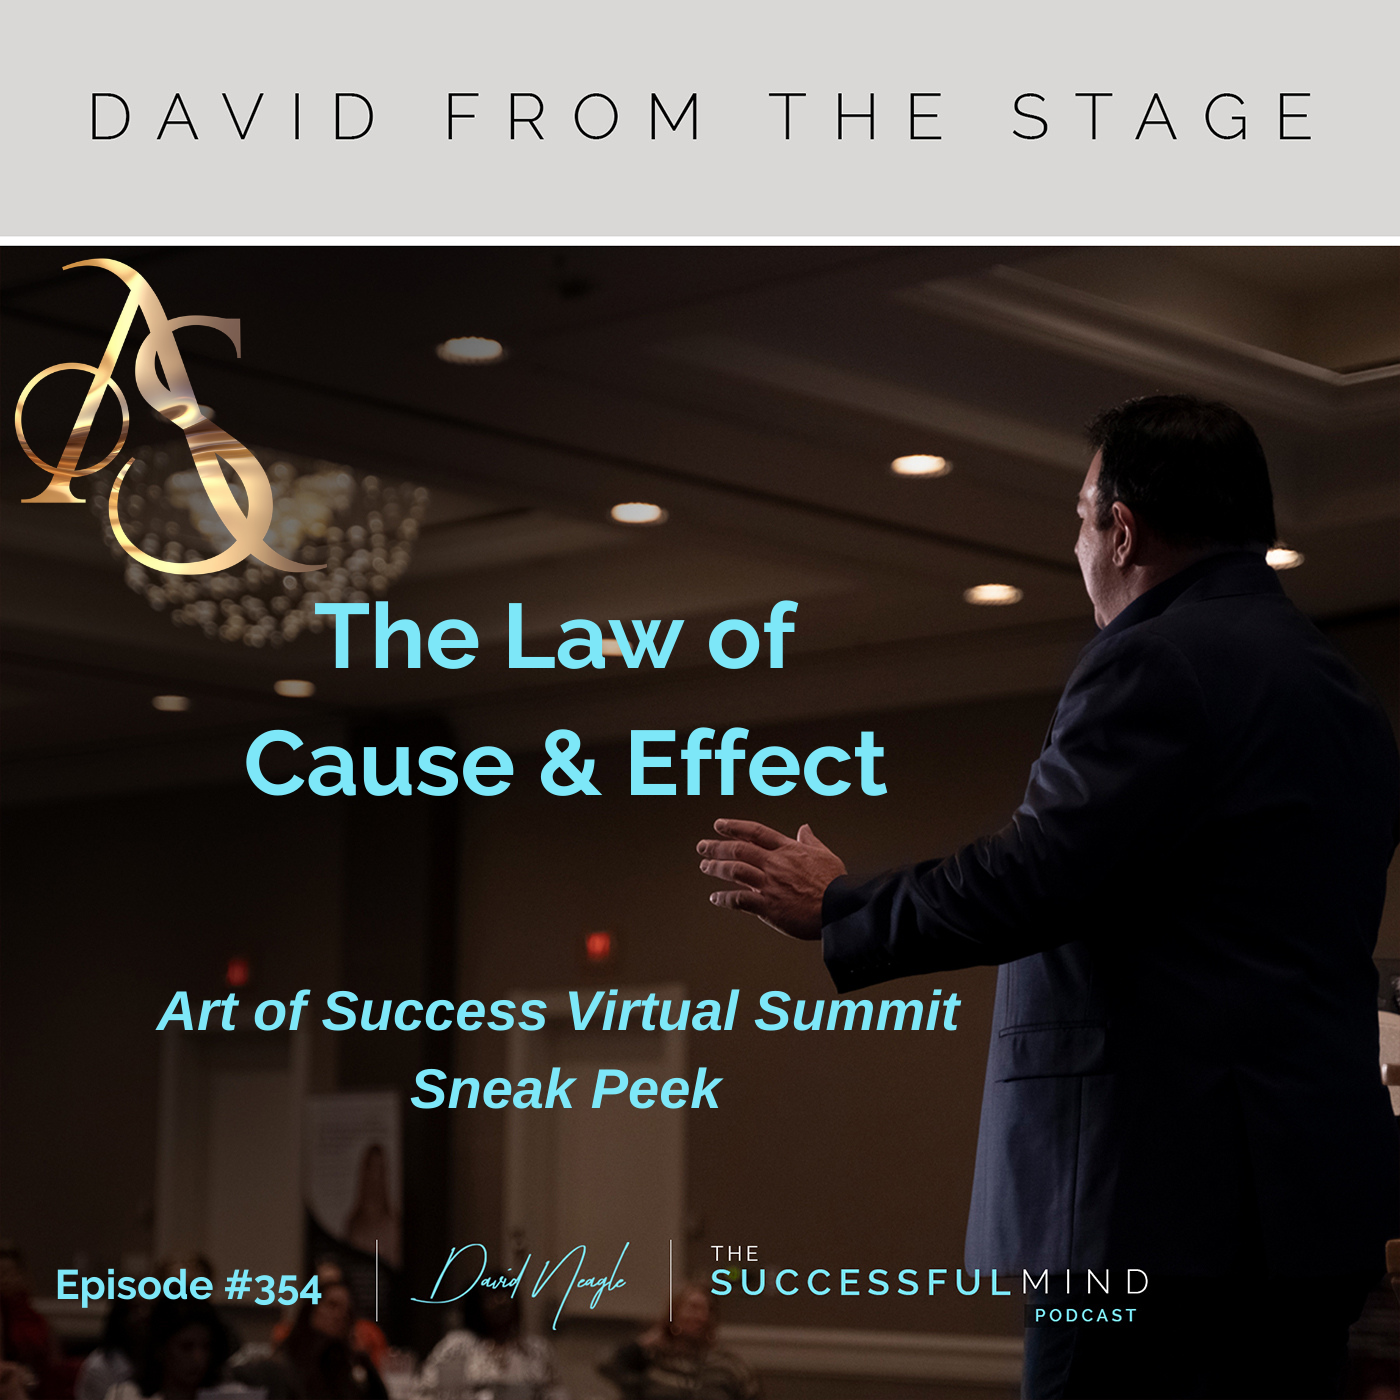 he Successful Mind Podcast - Episode 354 - AOSS Sneak Peek: The Law of Cause & Effect